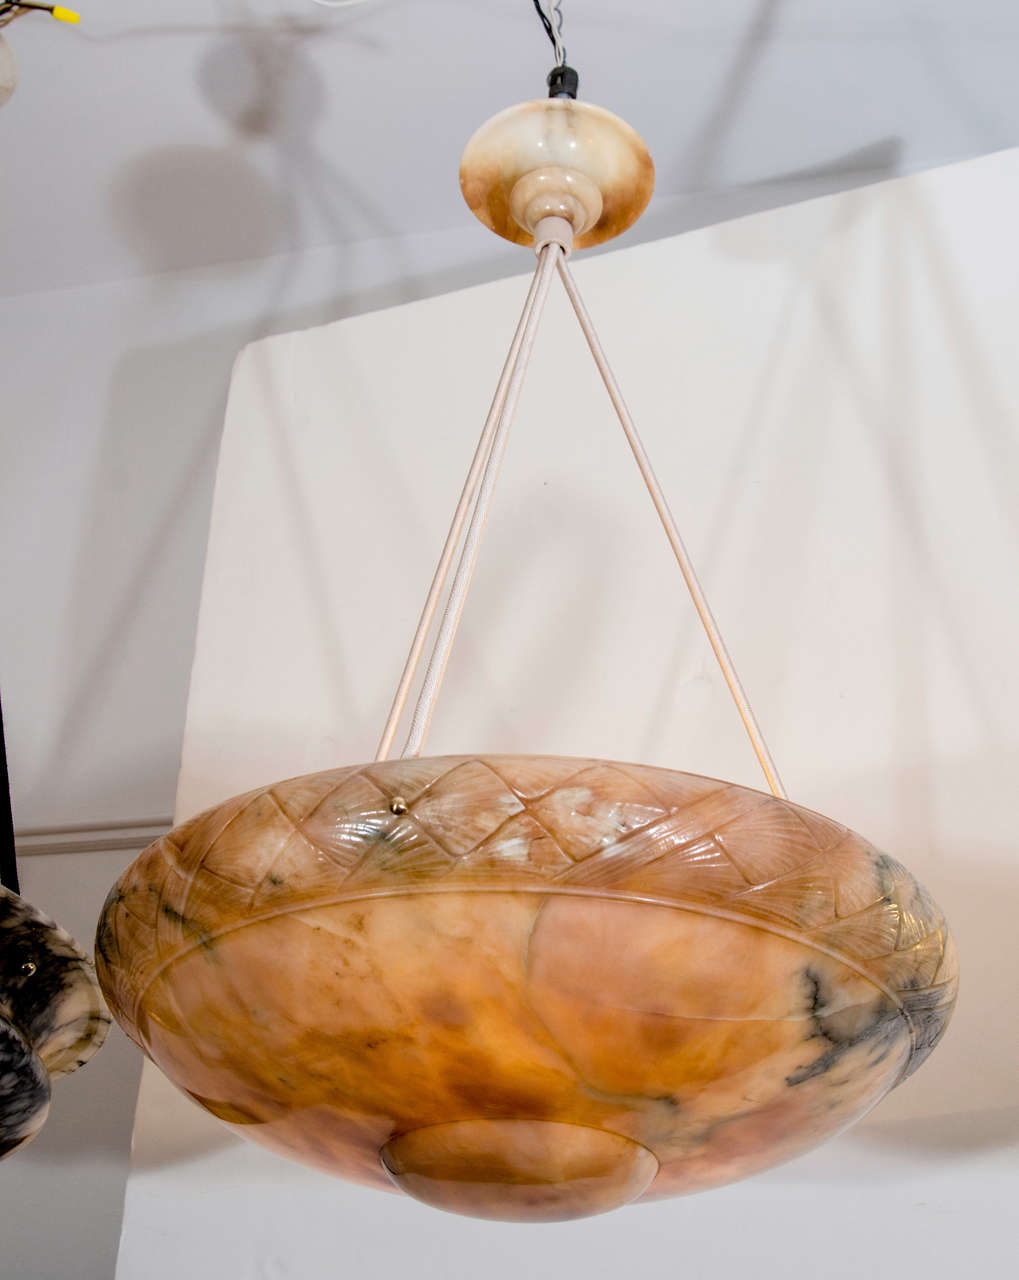 A tortoise toned neoclassical fixture with a rounded, carved band, deep mineral veining mingled with patches of crystal and an unusual canopy of matching alabaster.